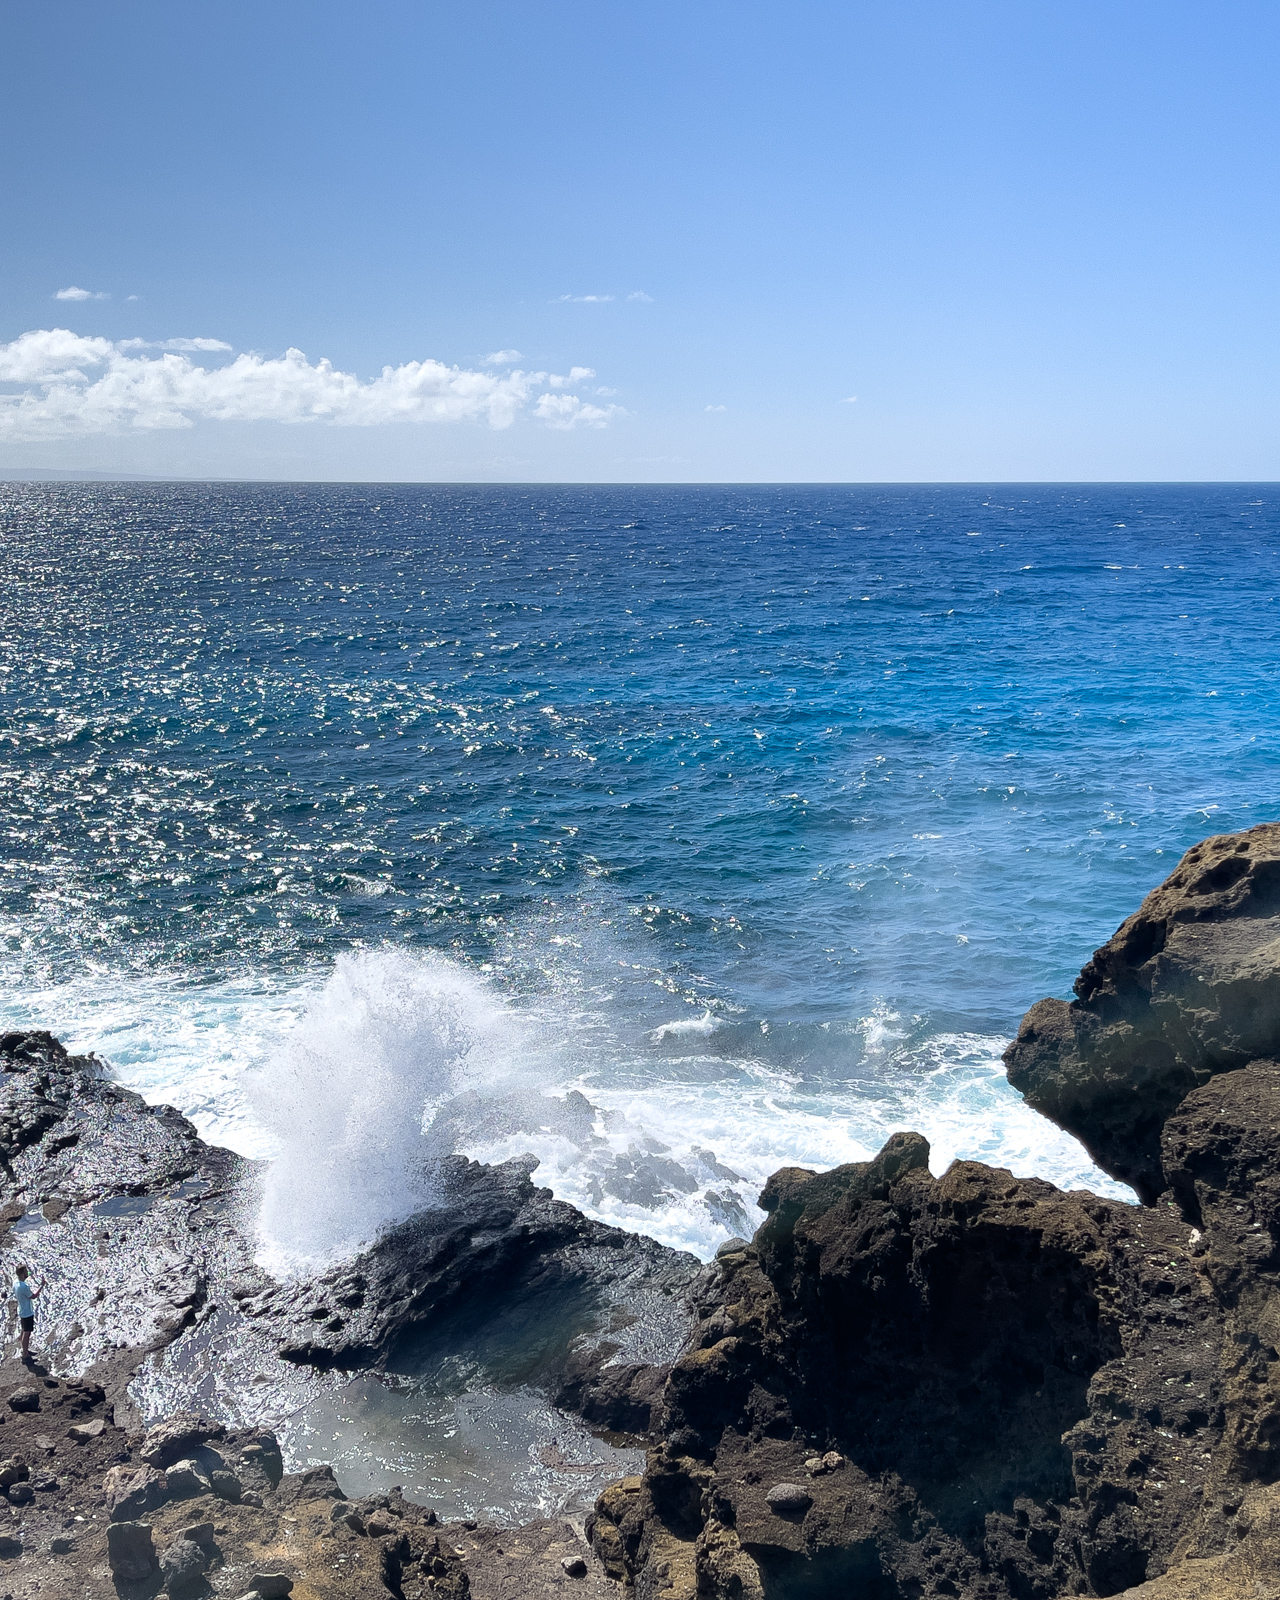 The Halona Blowhole is a popular stop for tourists on scenic drives around Oahu.